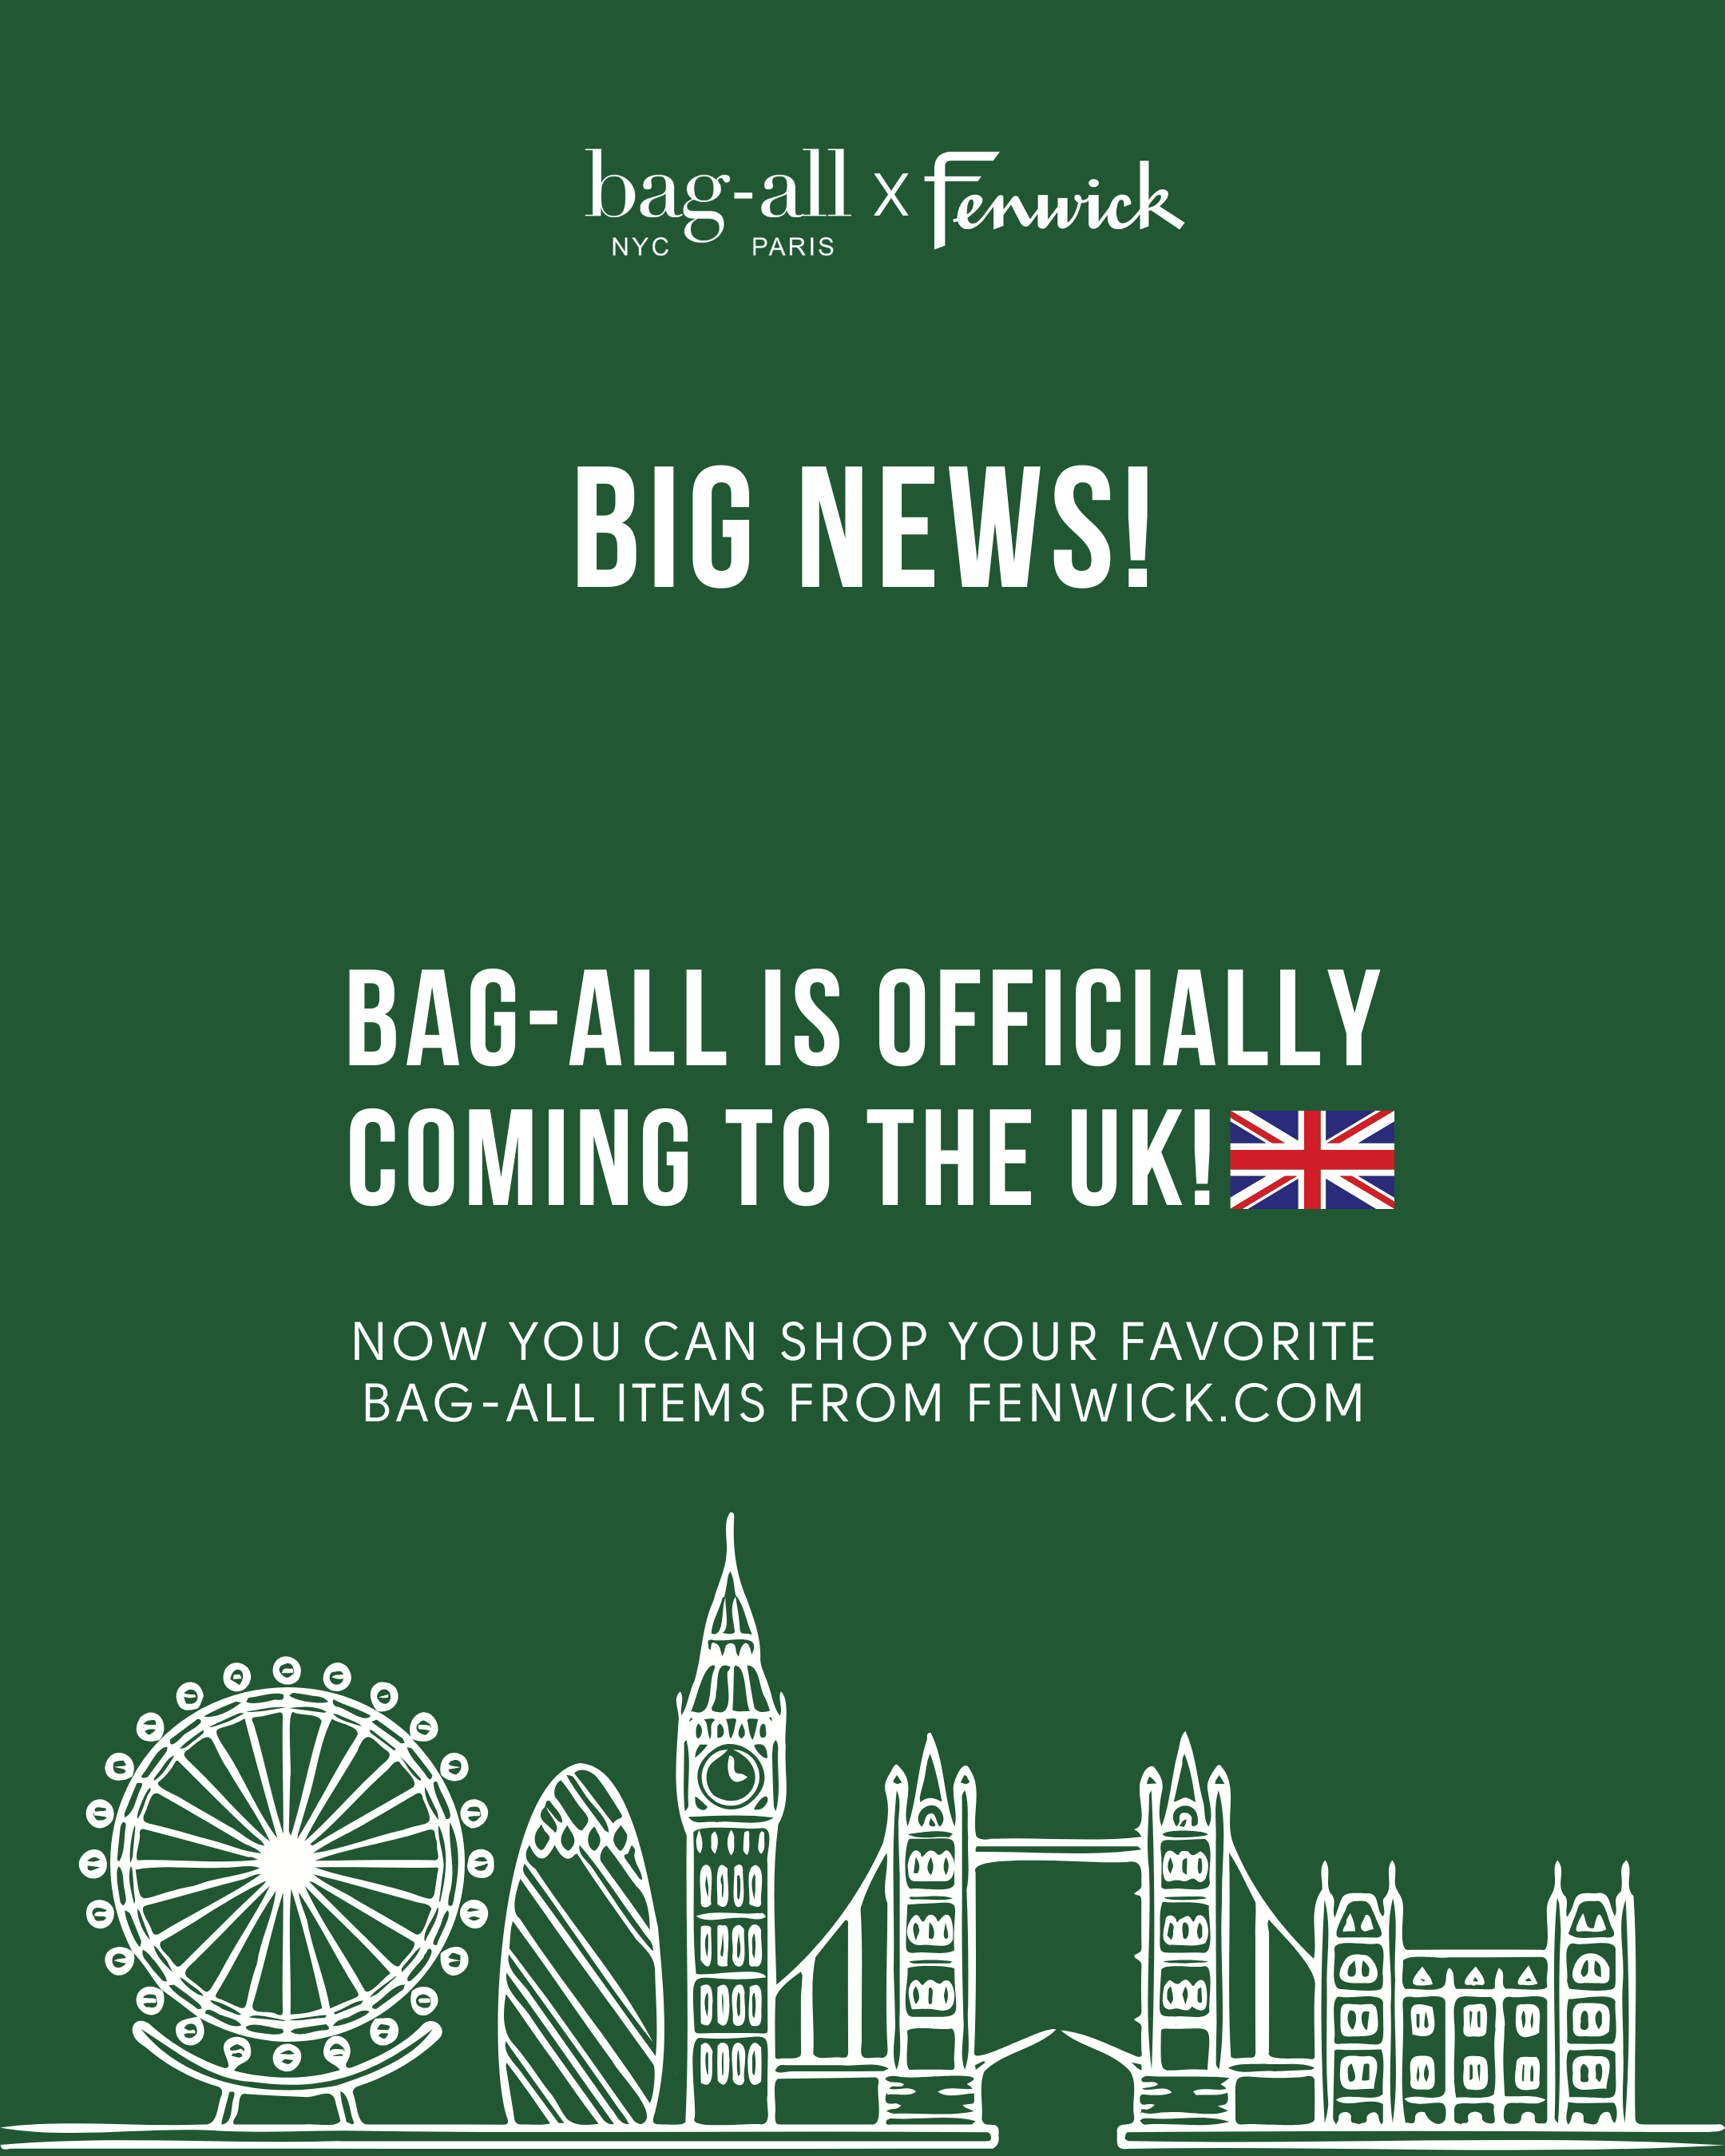 Bag-all Arriving in the UK!